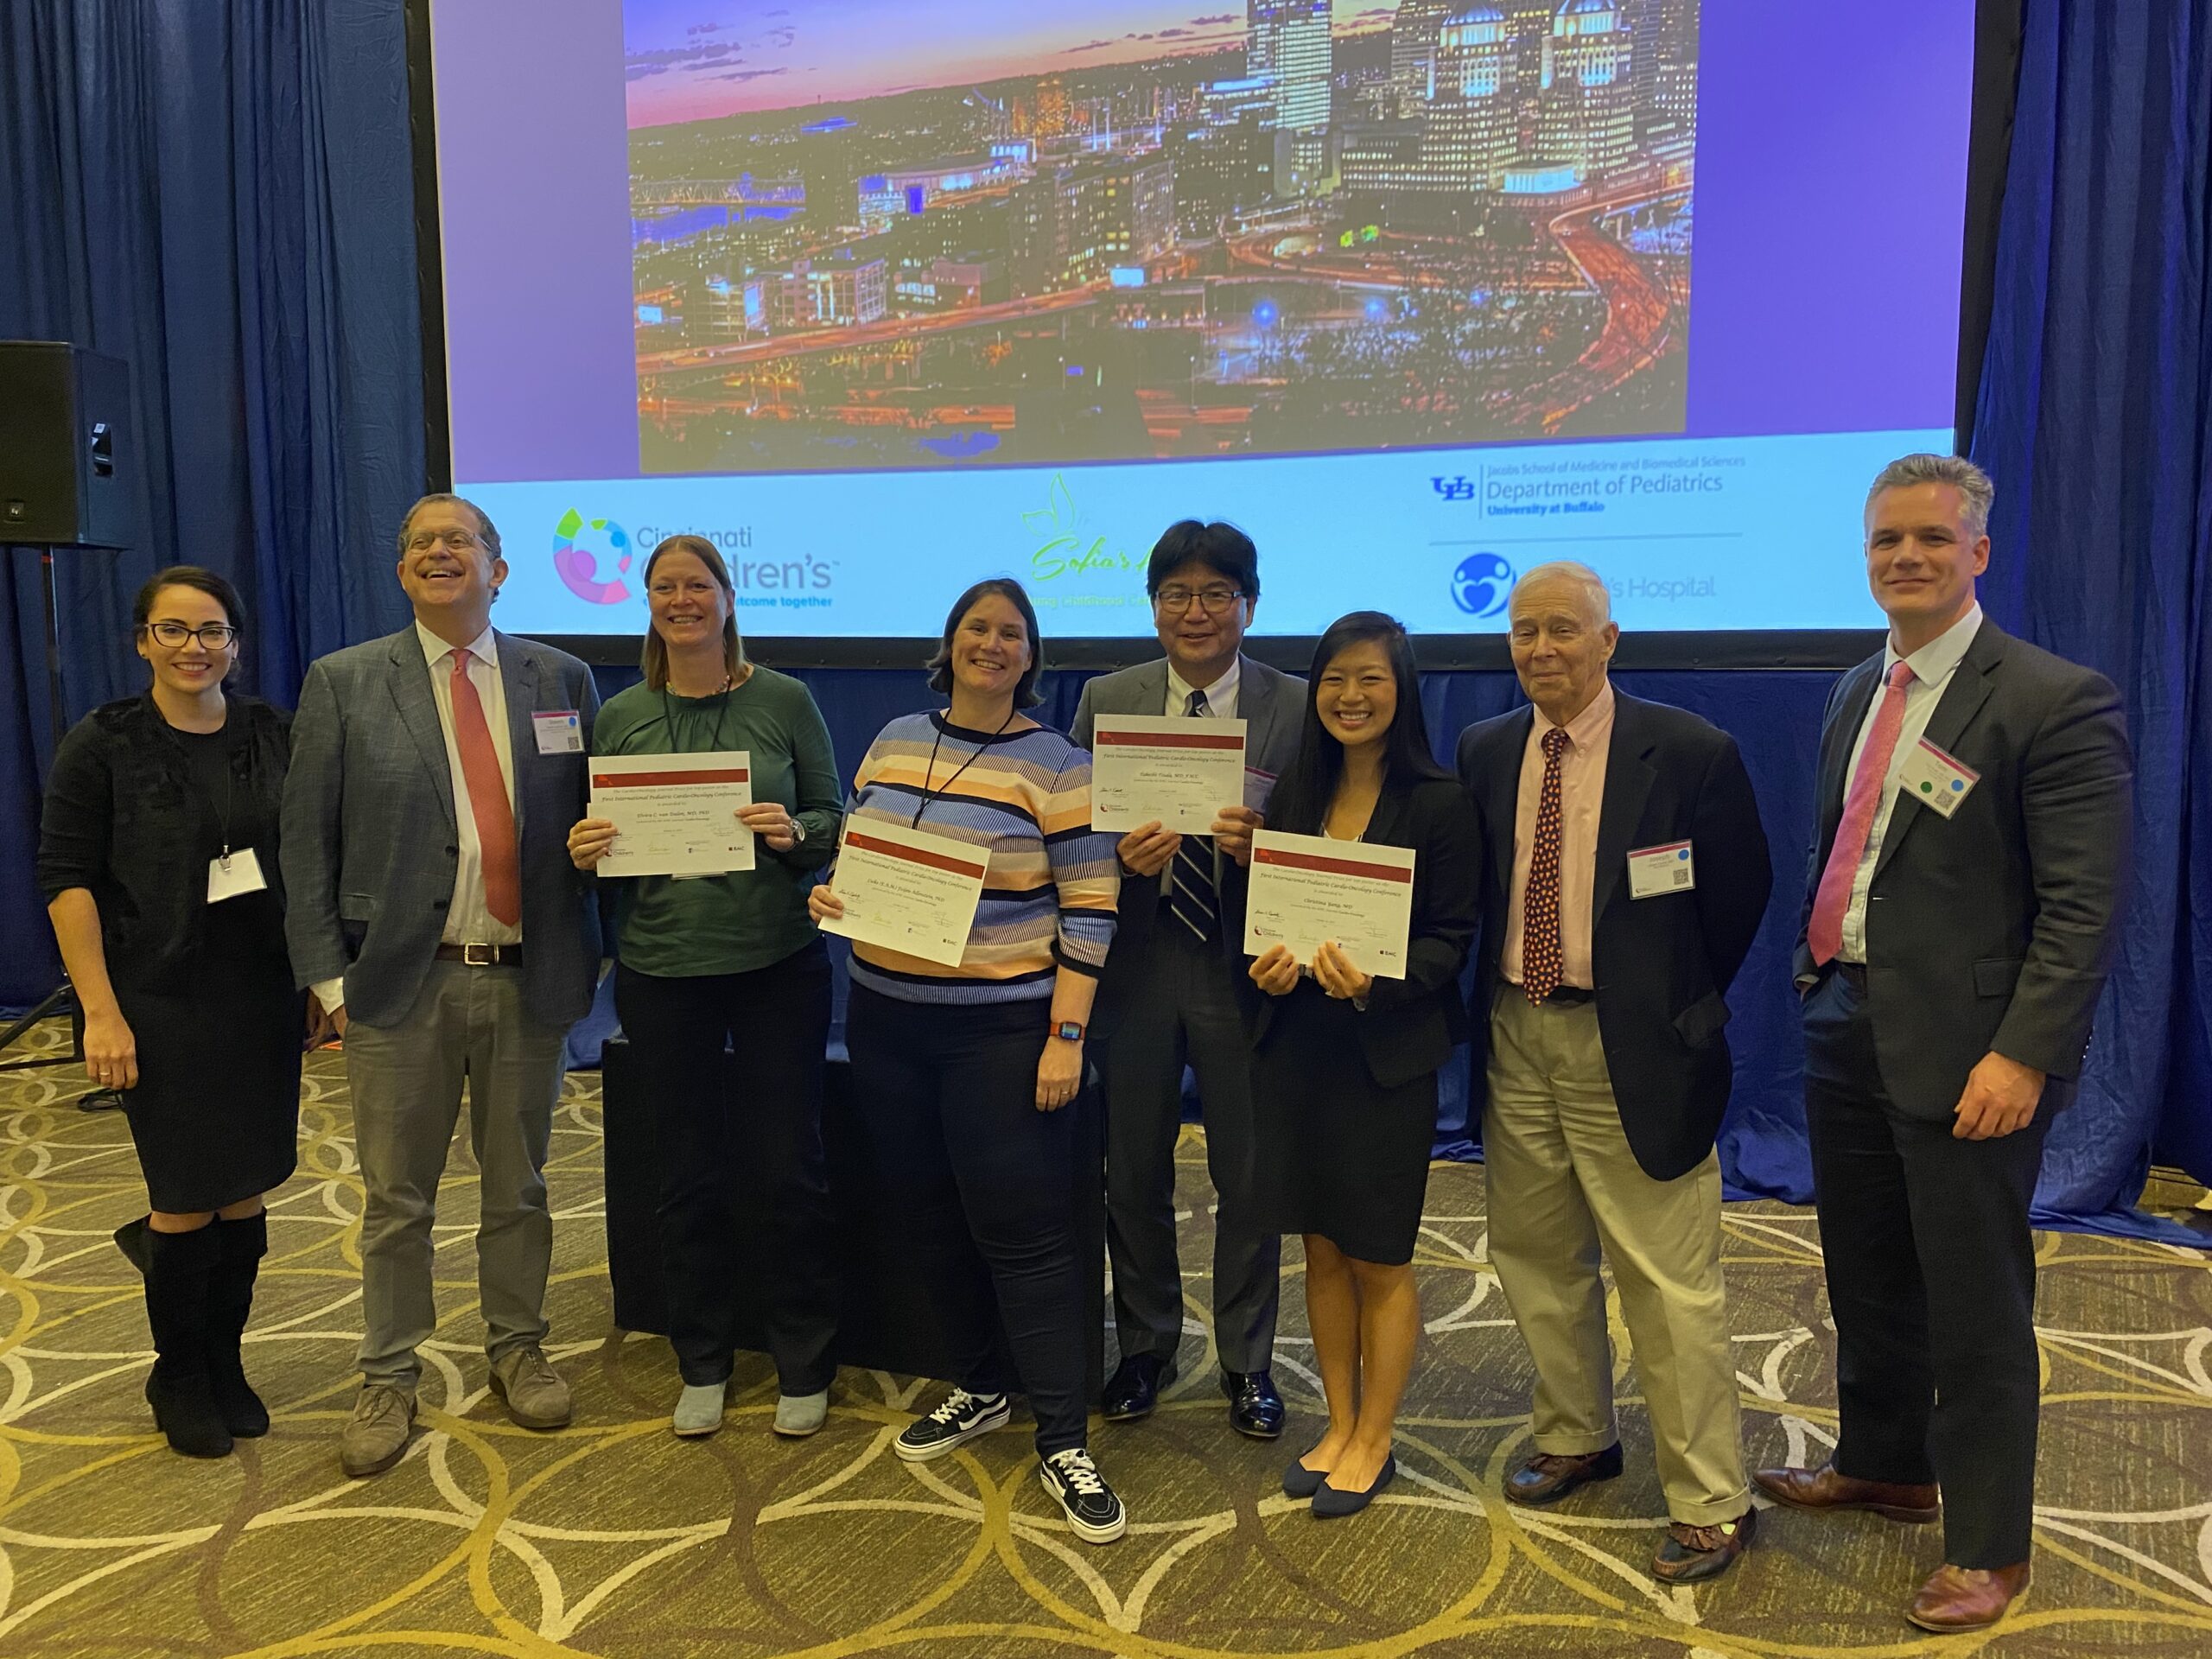 Winners of the 2022 Cardio Oncology Journal Prize